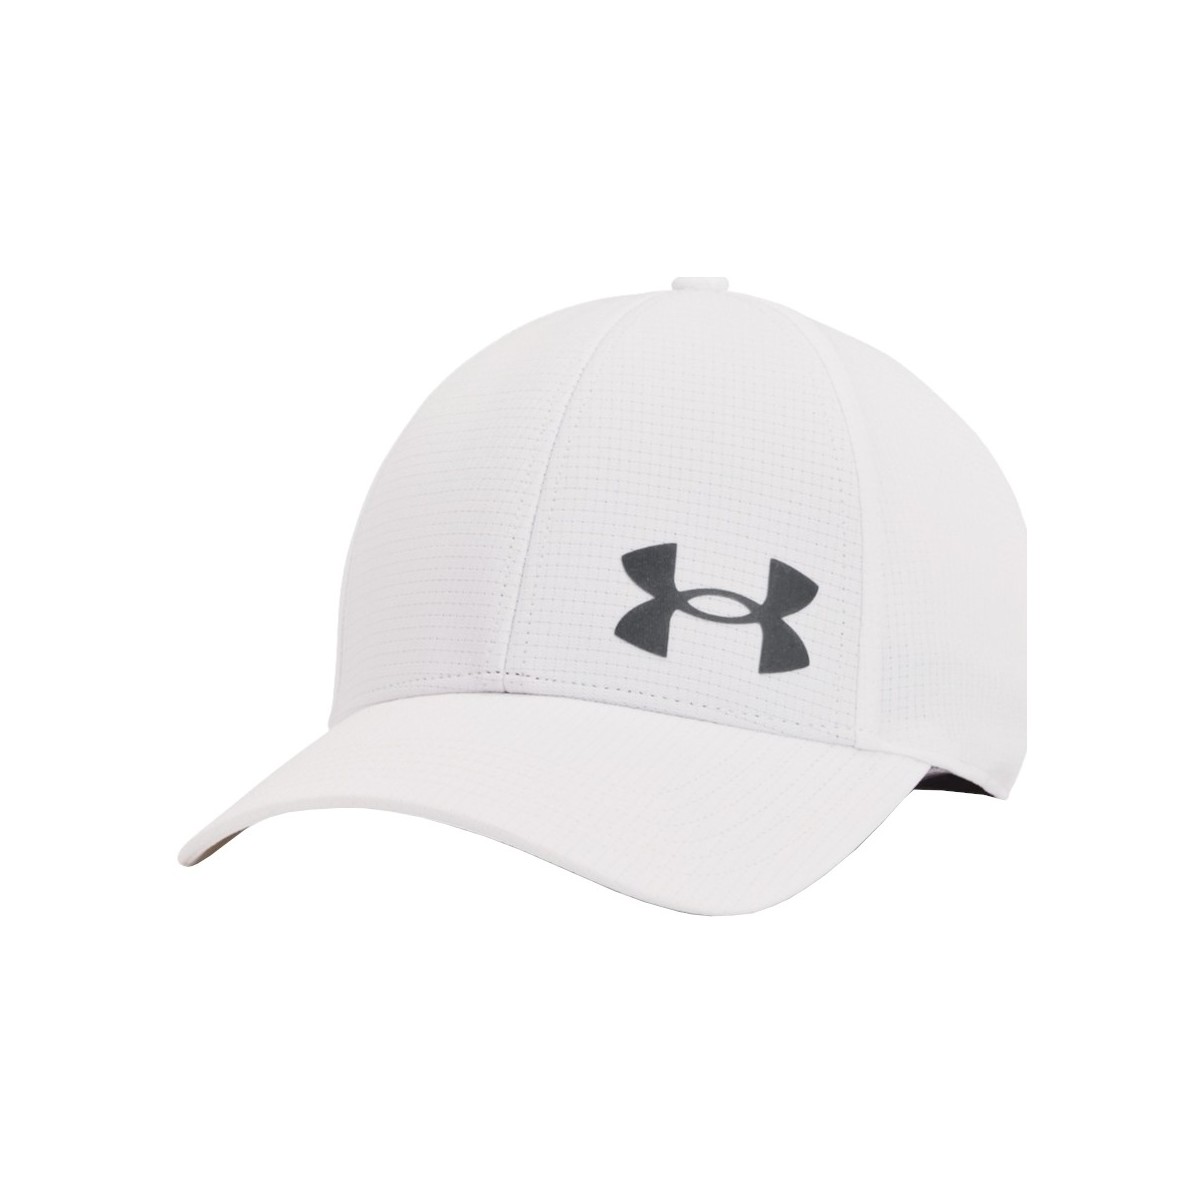 Accessoarer Herr Keps Under Armour Iso-Chill ArmourVent Cap Vit